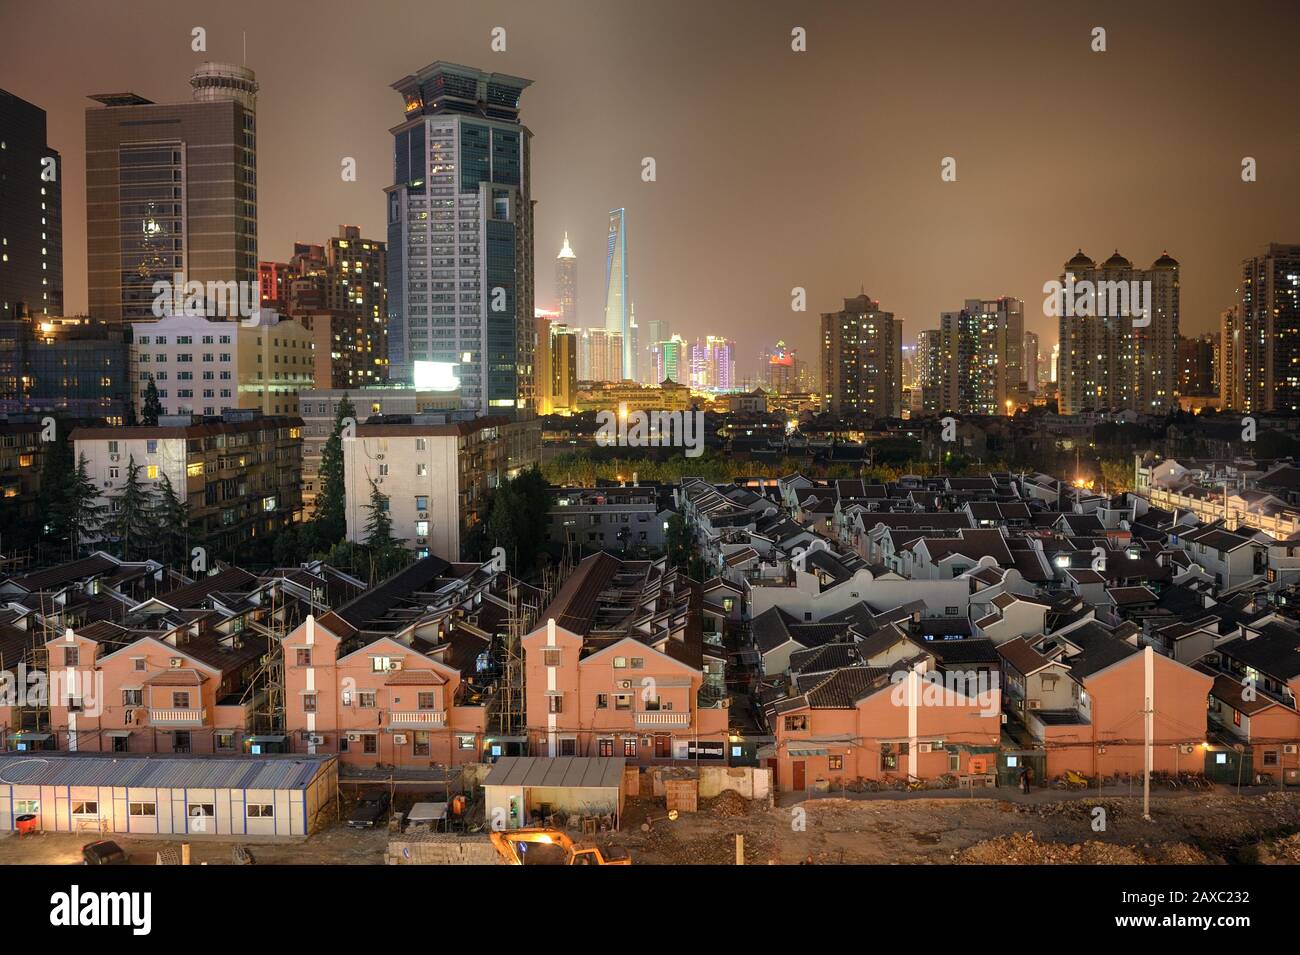 Old Shanghai area in foreground, new Pudong financial district in background. Jin Mao and SWFC are visible. Stock Photo